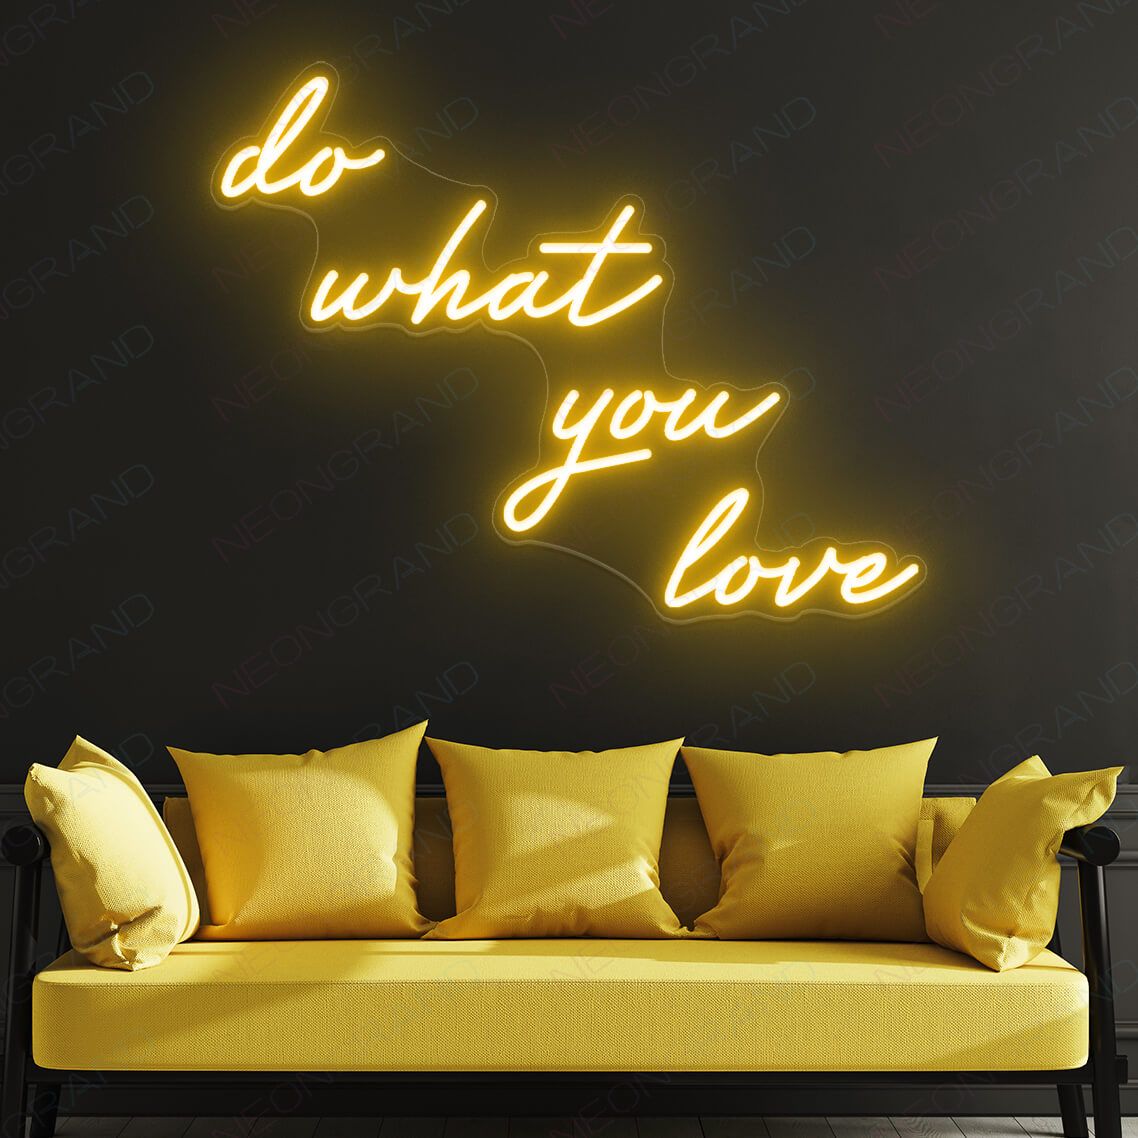 Do What You Love Neon Sign Love Led Light Sign orange yellow